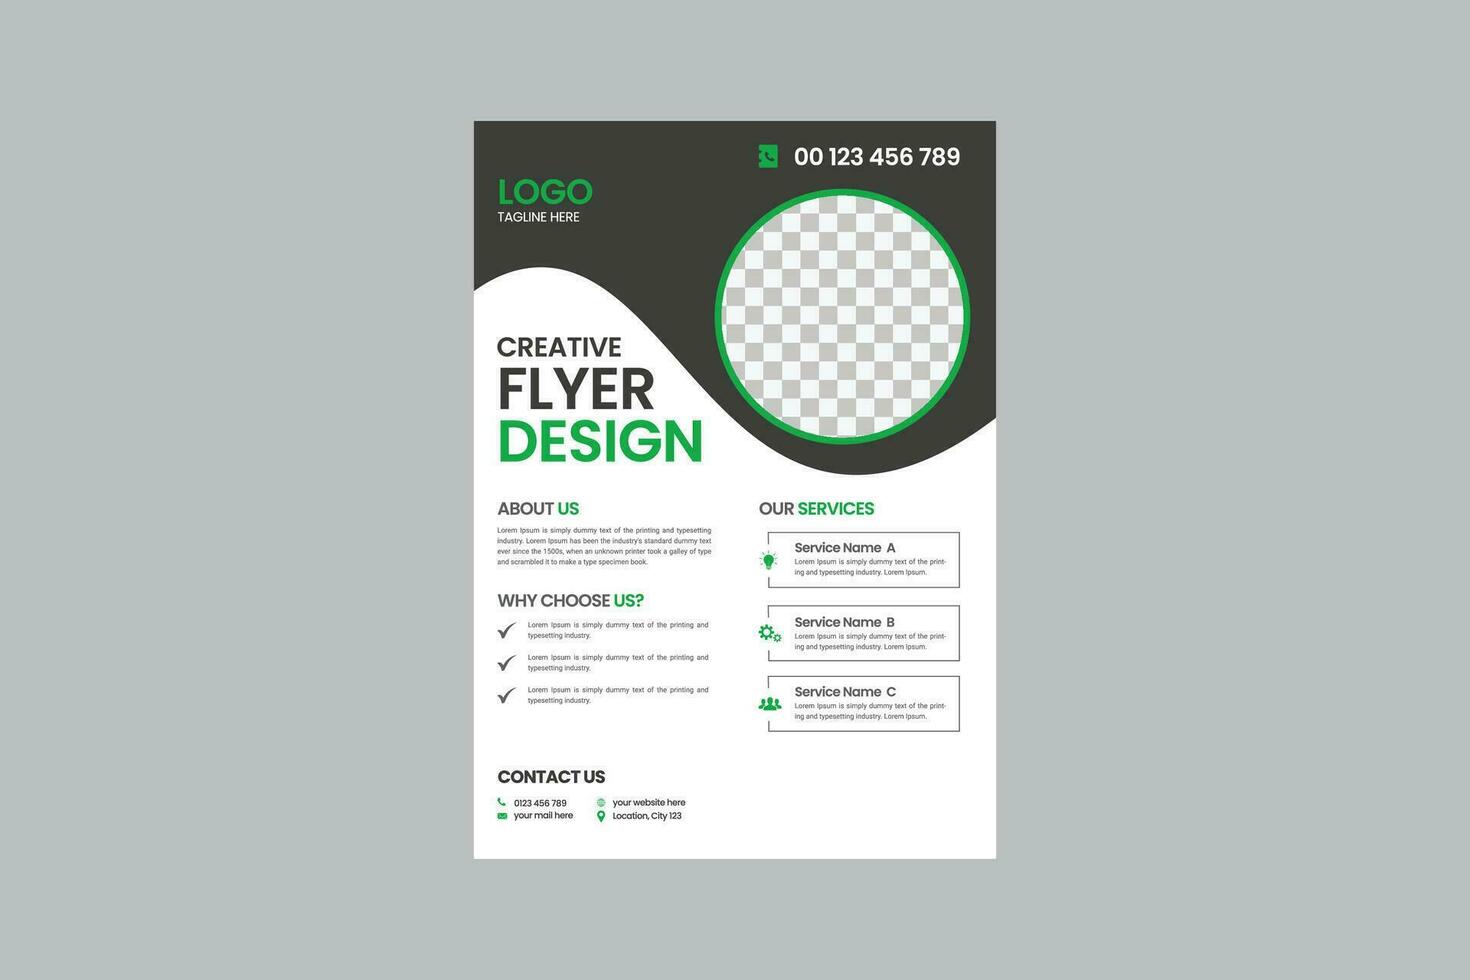 Corporate business flyer, Flyer cover design, Annual report, Corporate presentation, Agency marketing poster, Digital marketing flyer, Business brochure and editable print ready layout template design vector